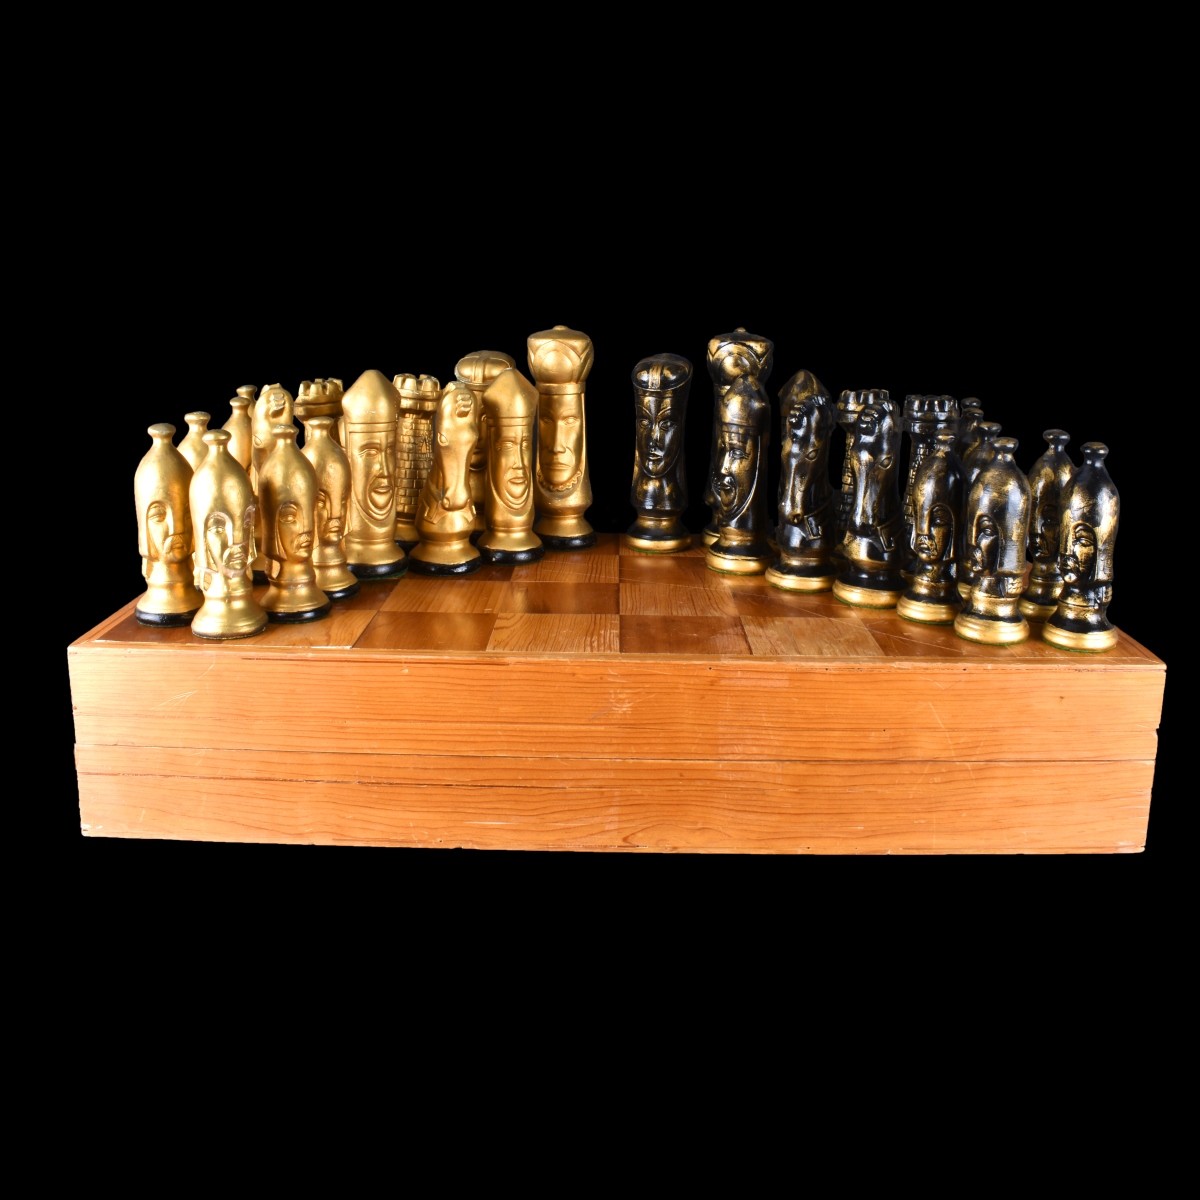 Oversized Vintage Pottery Chess Set In Case